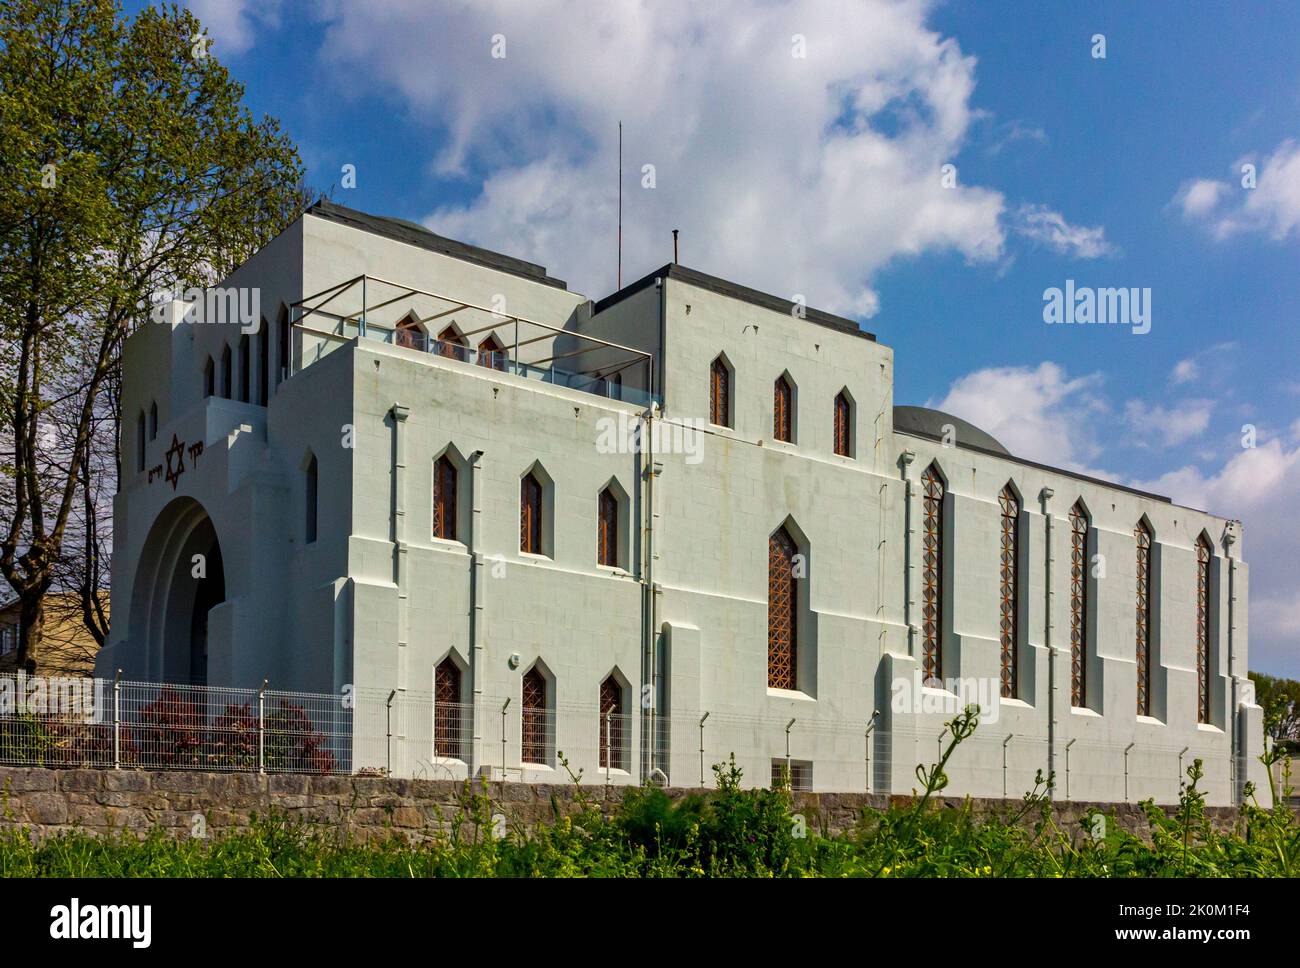 The Synagogue Kadoorie Mekor Haim and Jewish Museum in Boavista Porto Portugal founded by Artur Carlos de Barros Basto and opened in 1938. Stock Photo